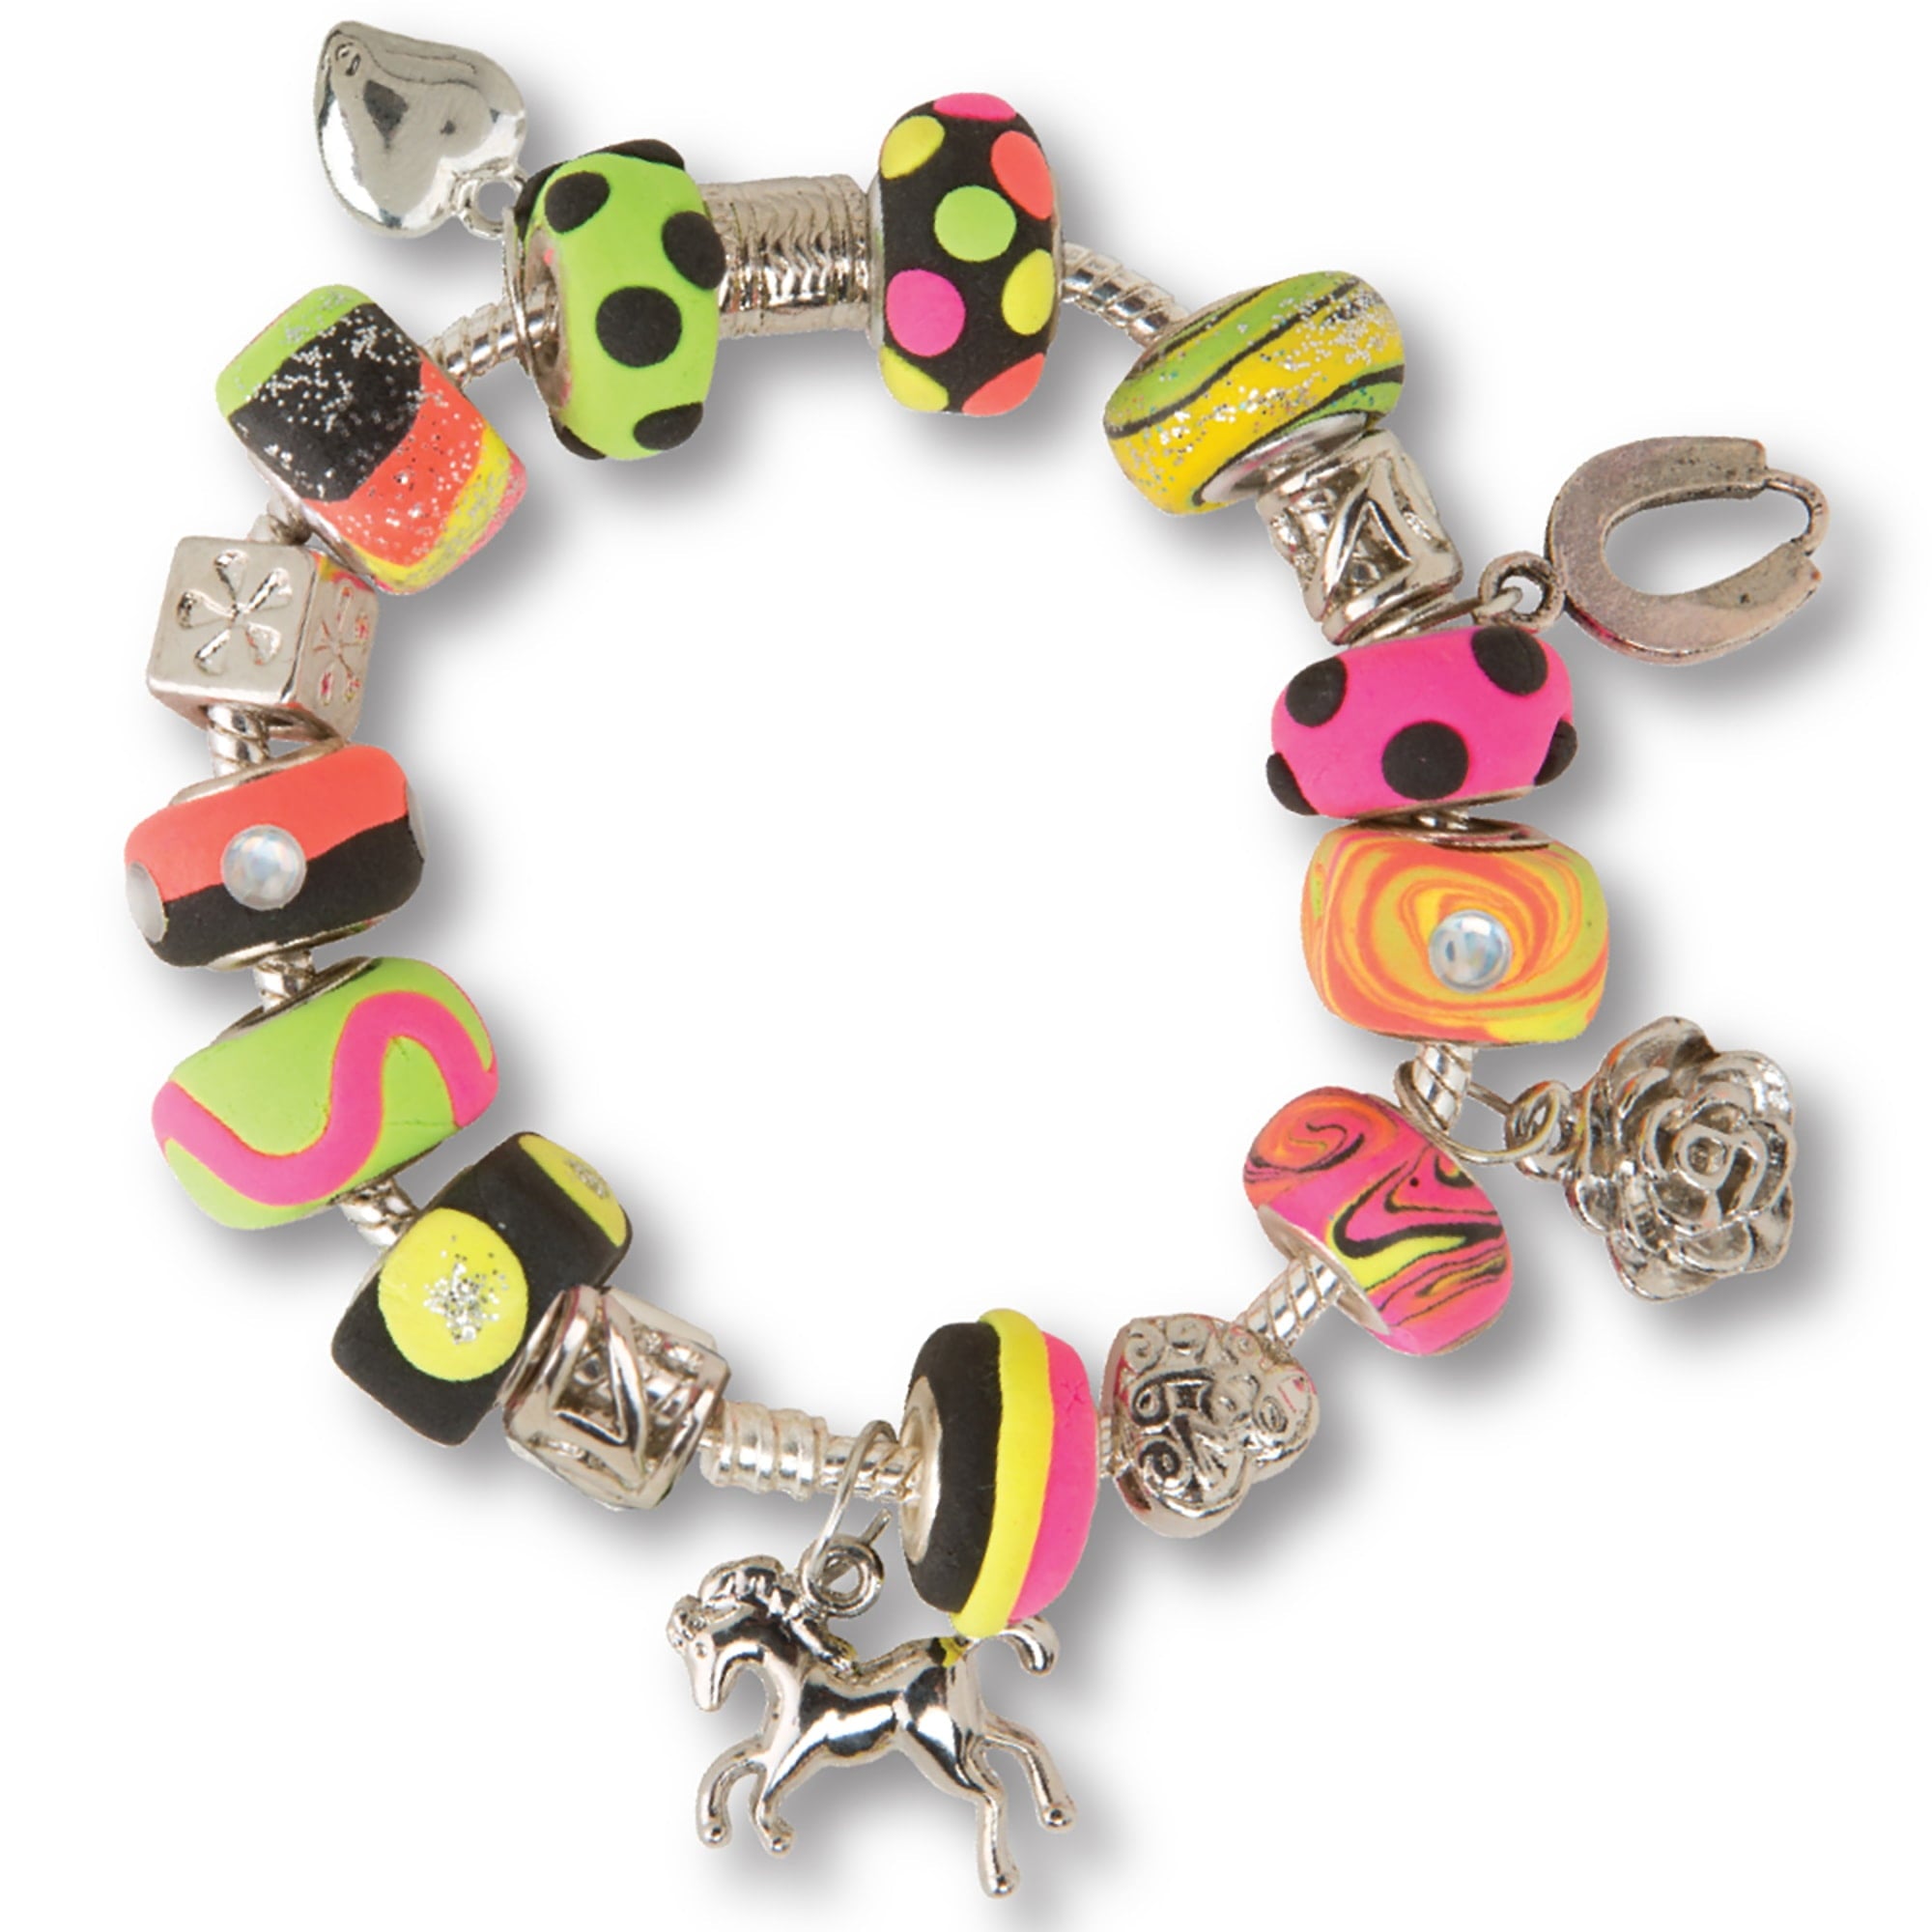 Amav Fashion Time Cool Charm Bracelets,Make Beads from Air-Dry Dough to Create Your Personalized Charm Bracelet, Children Ages 6 Years and Up